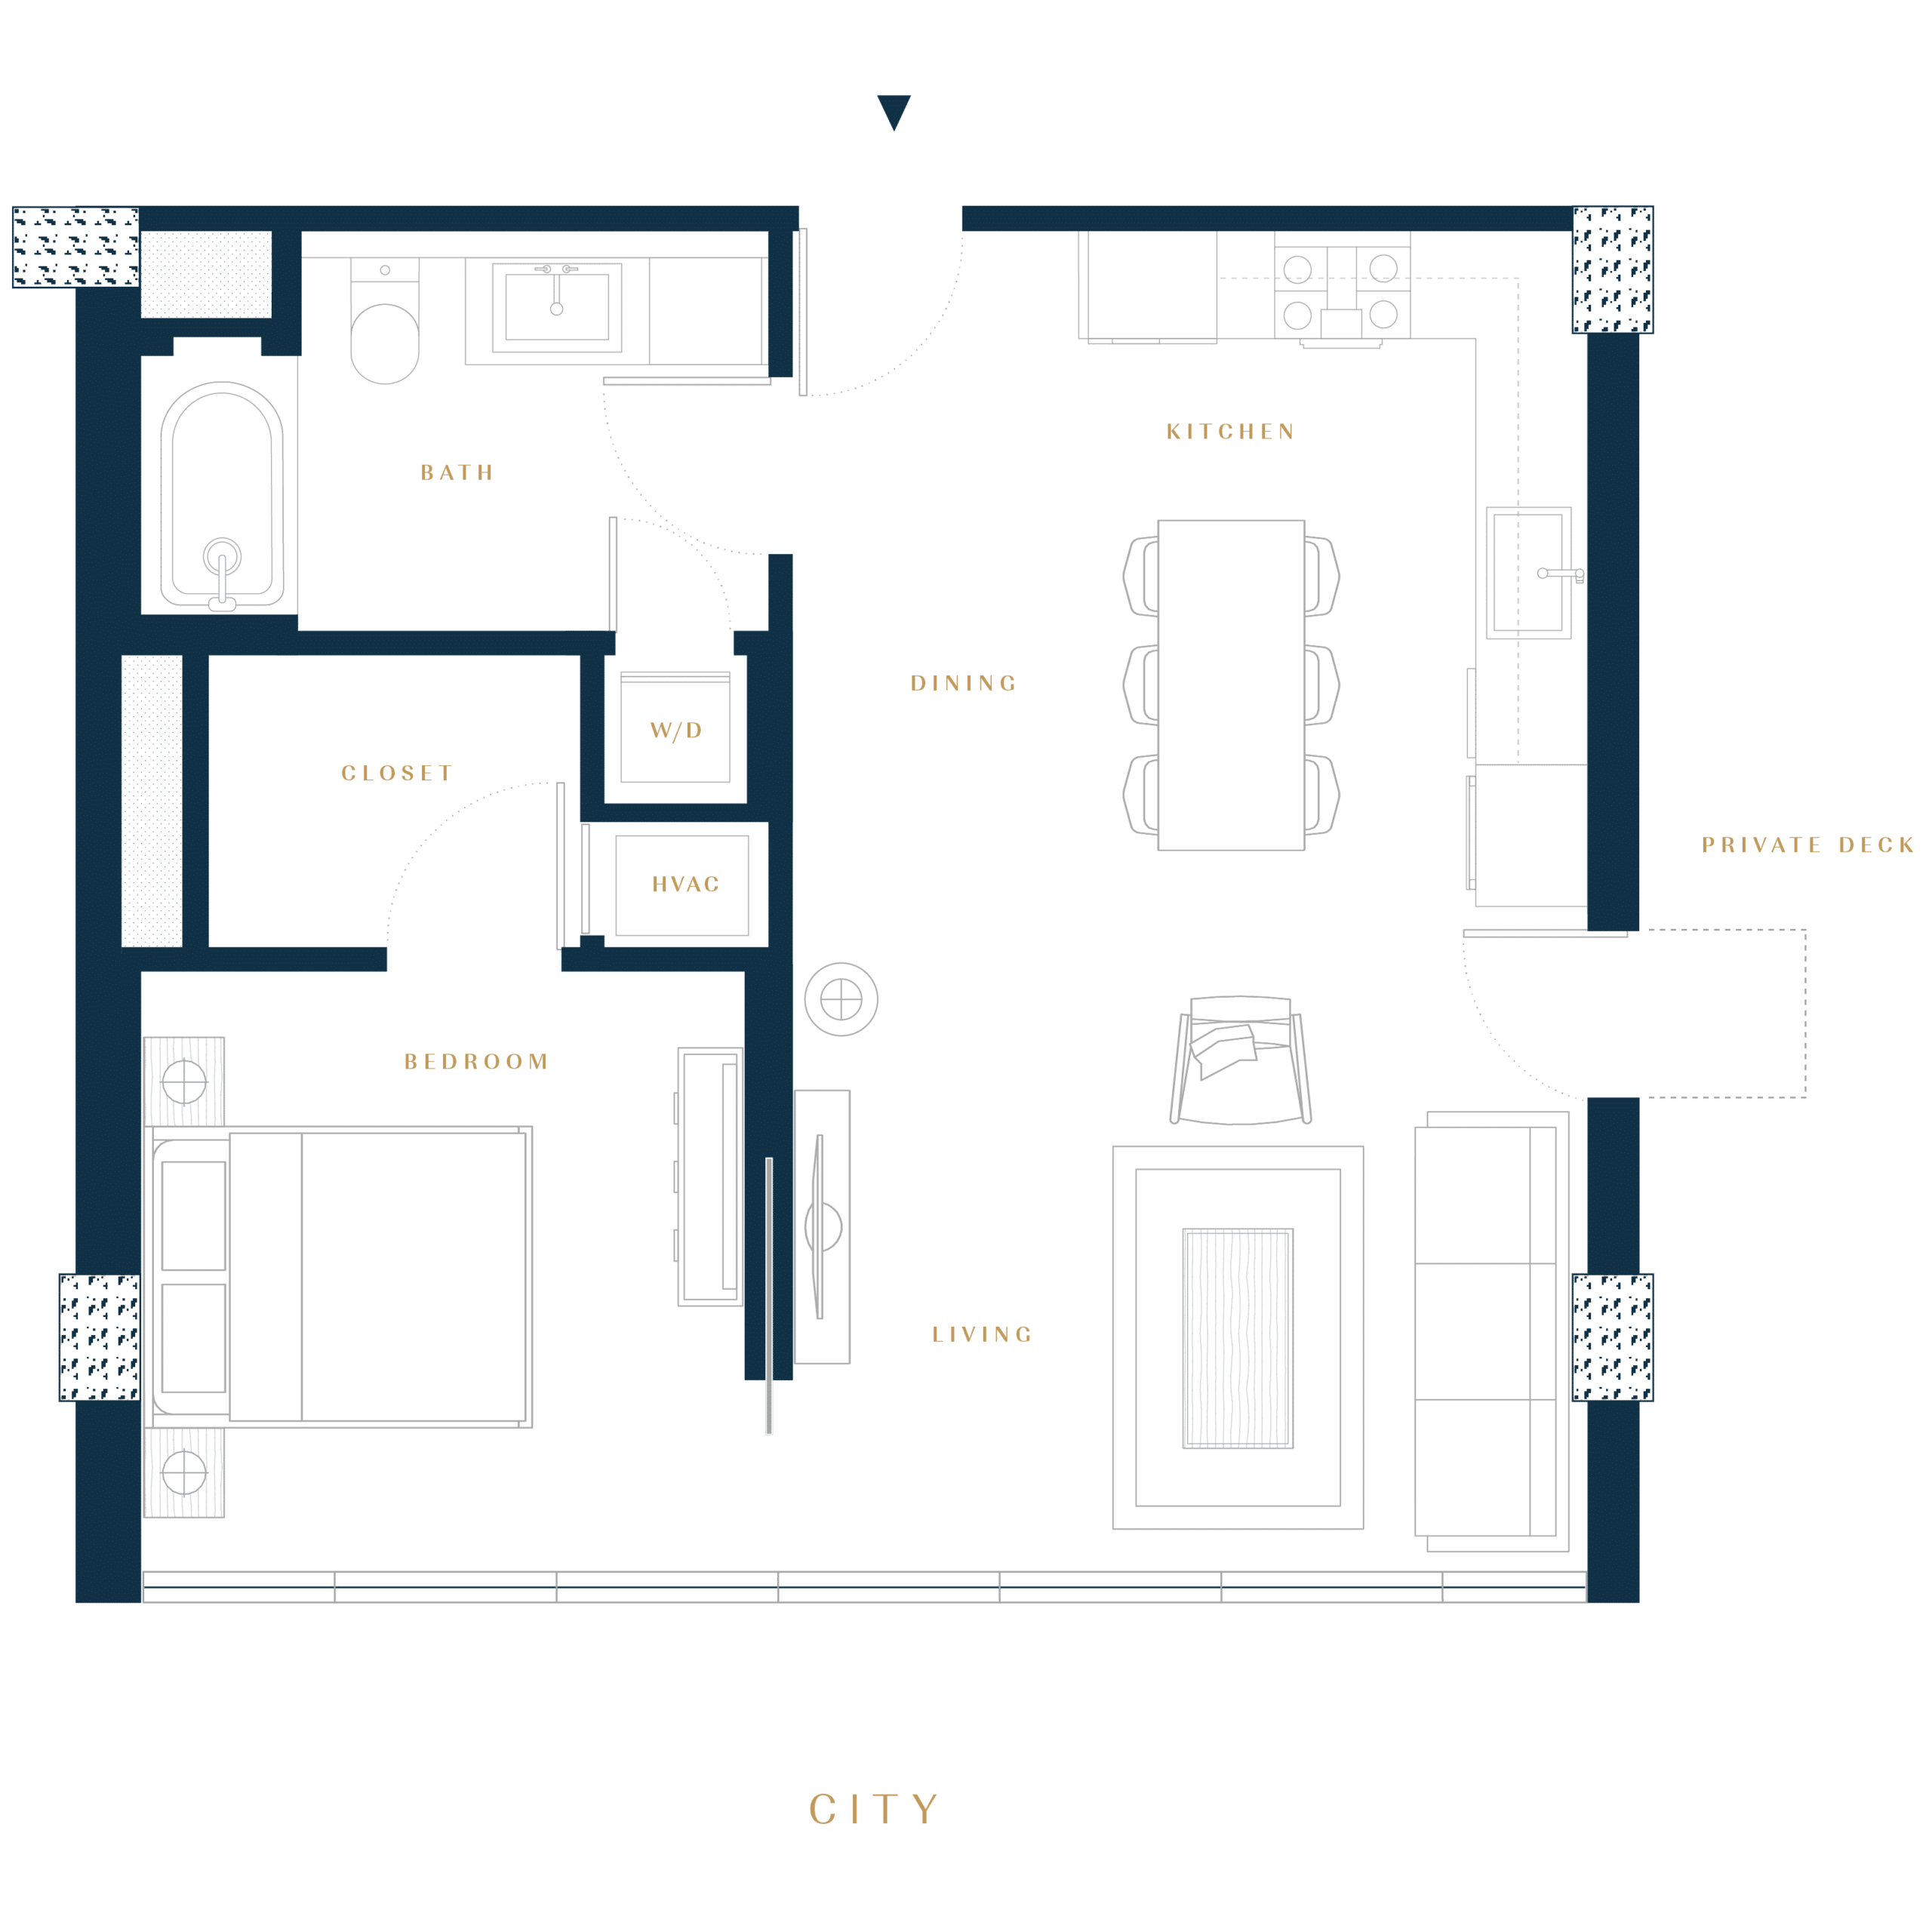 Residence 1F luxury condo floor plan with private deck in San Francisco Dogpatch